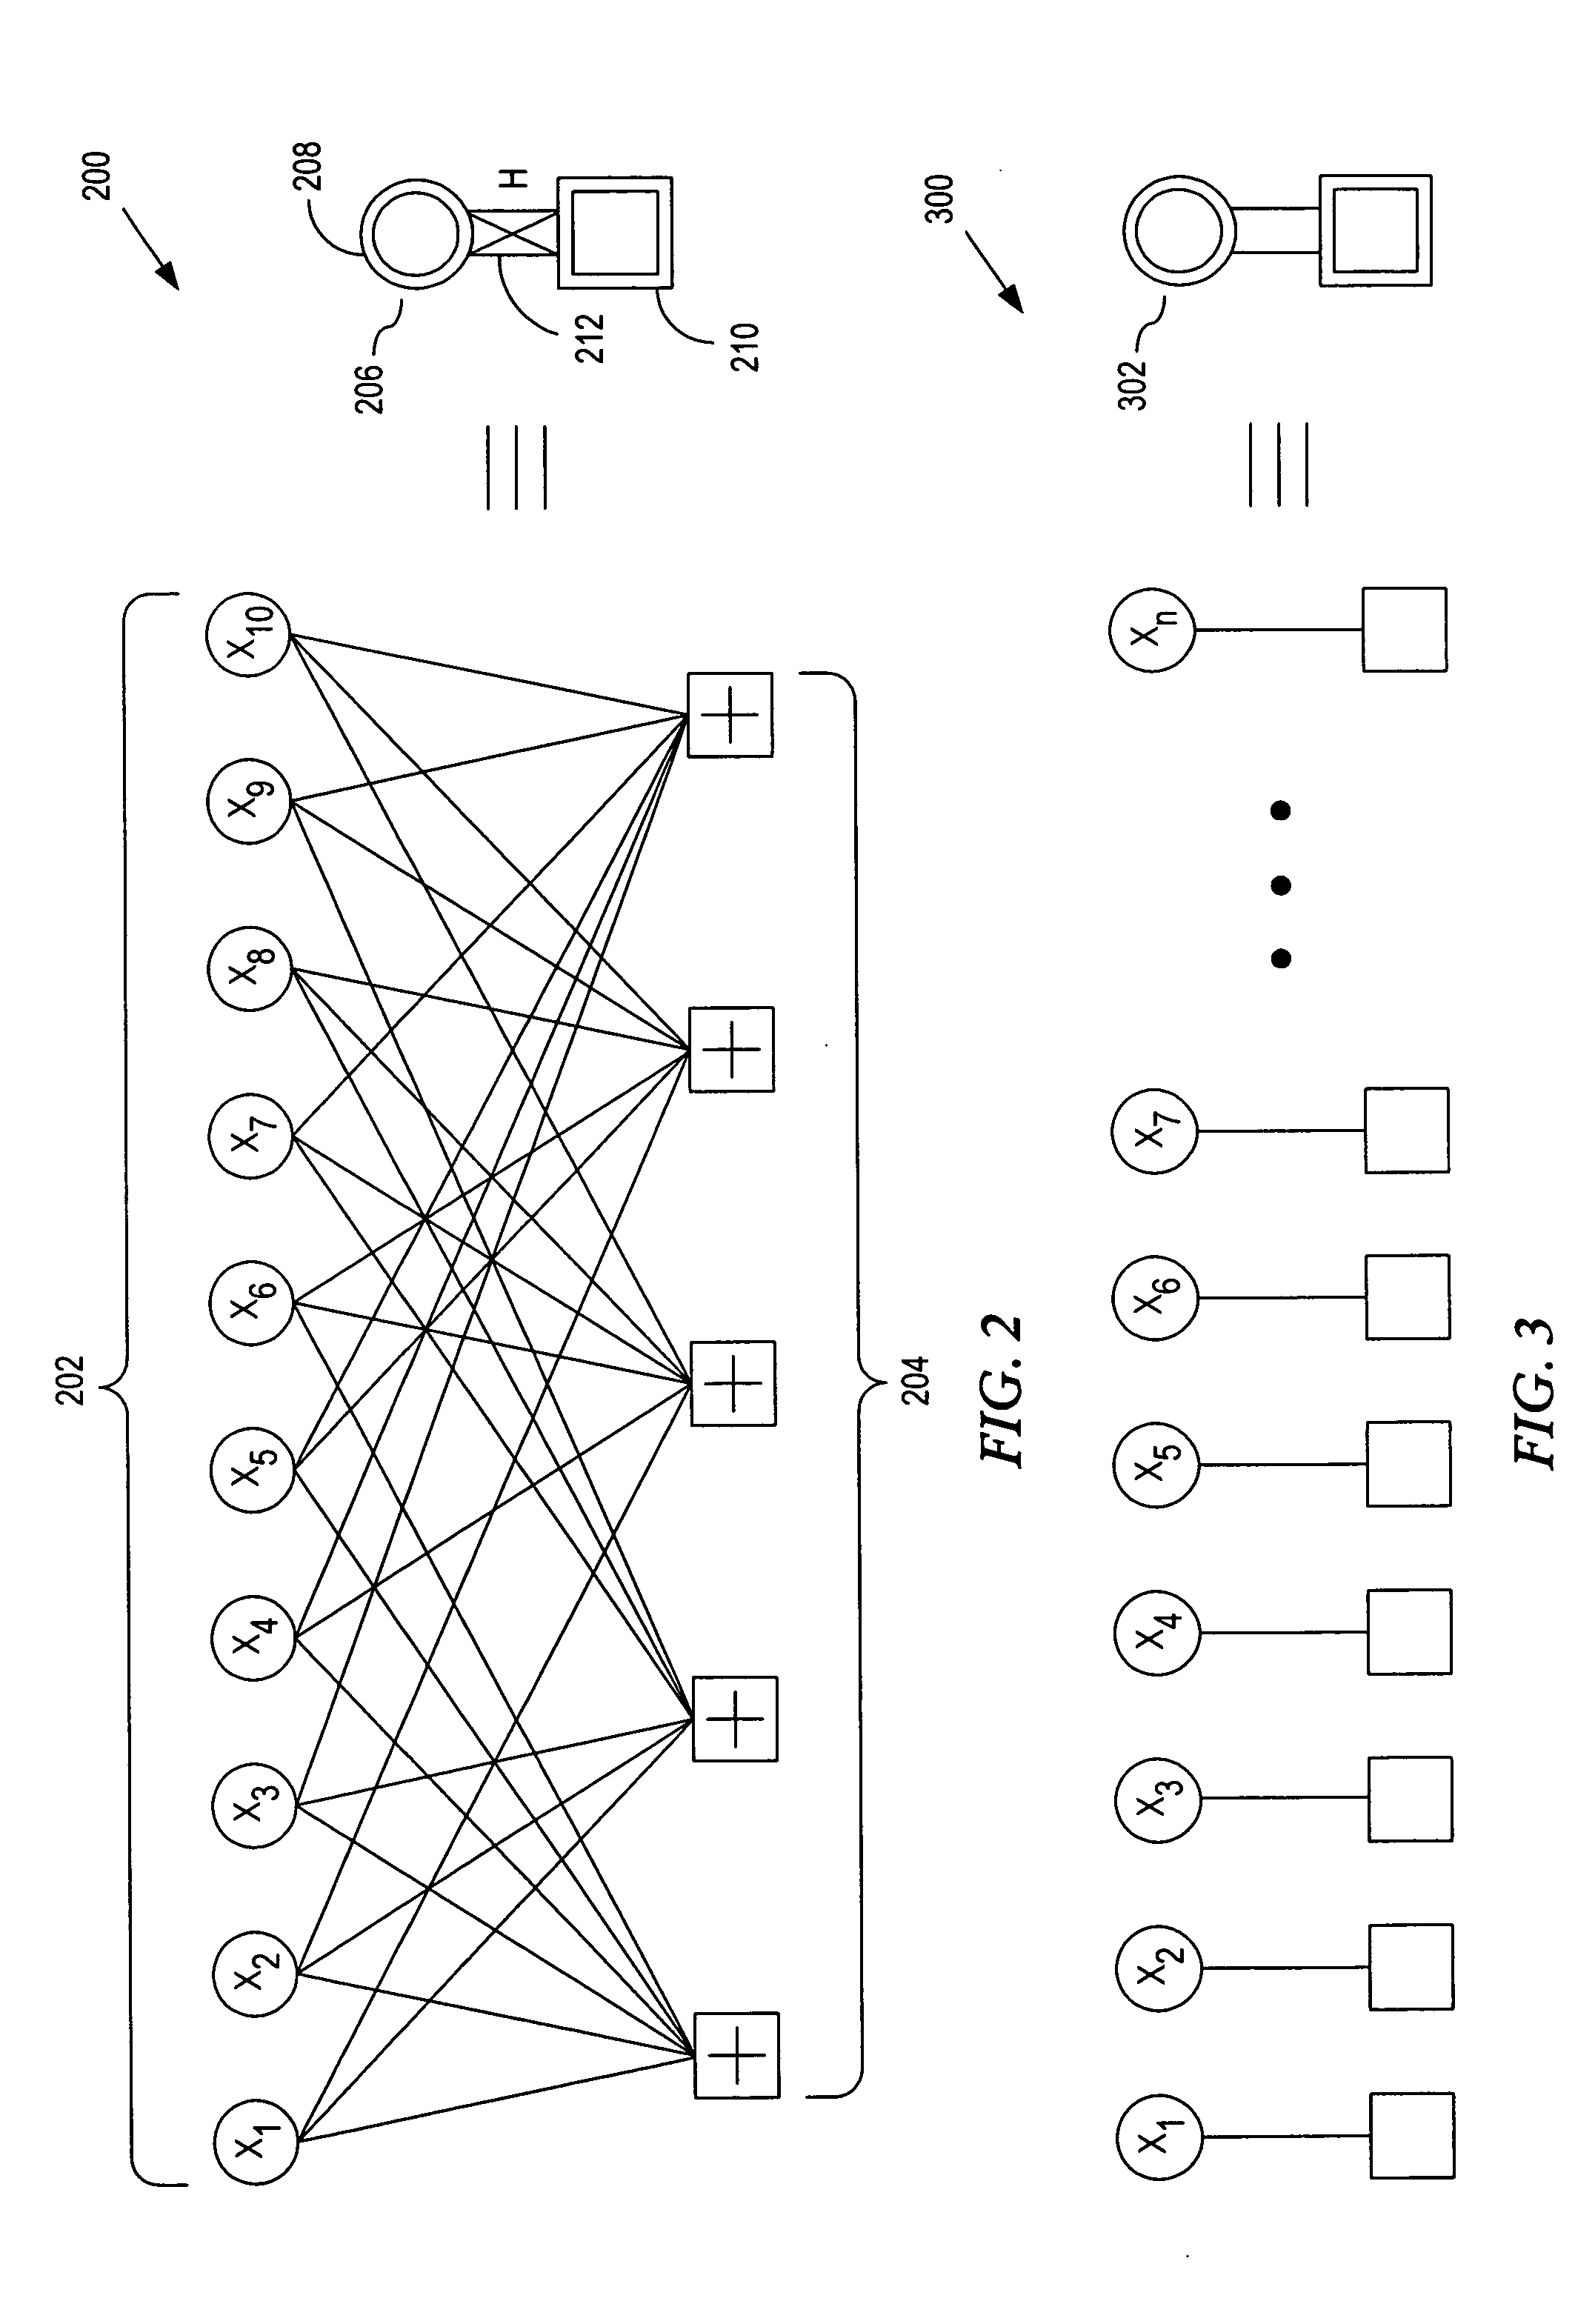 General code design for the relay channel and factor graph decoding